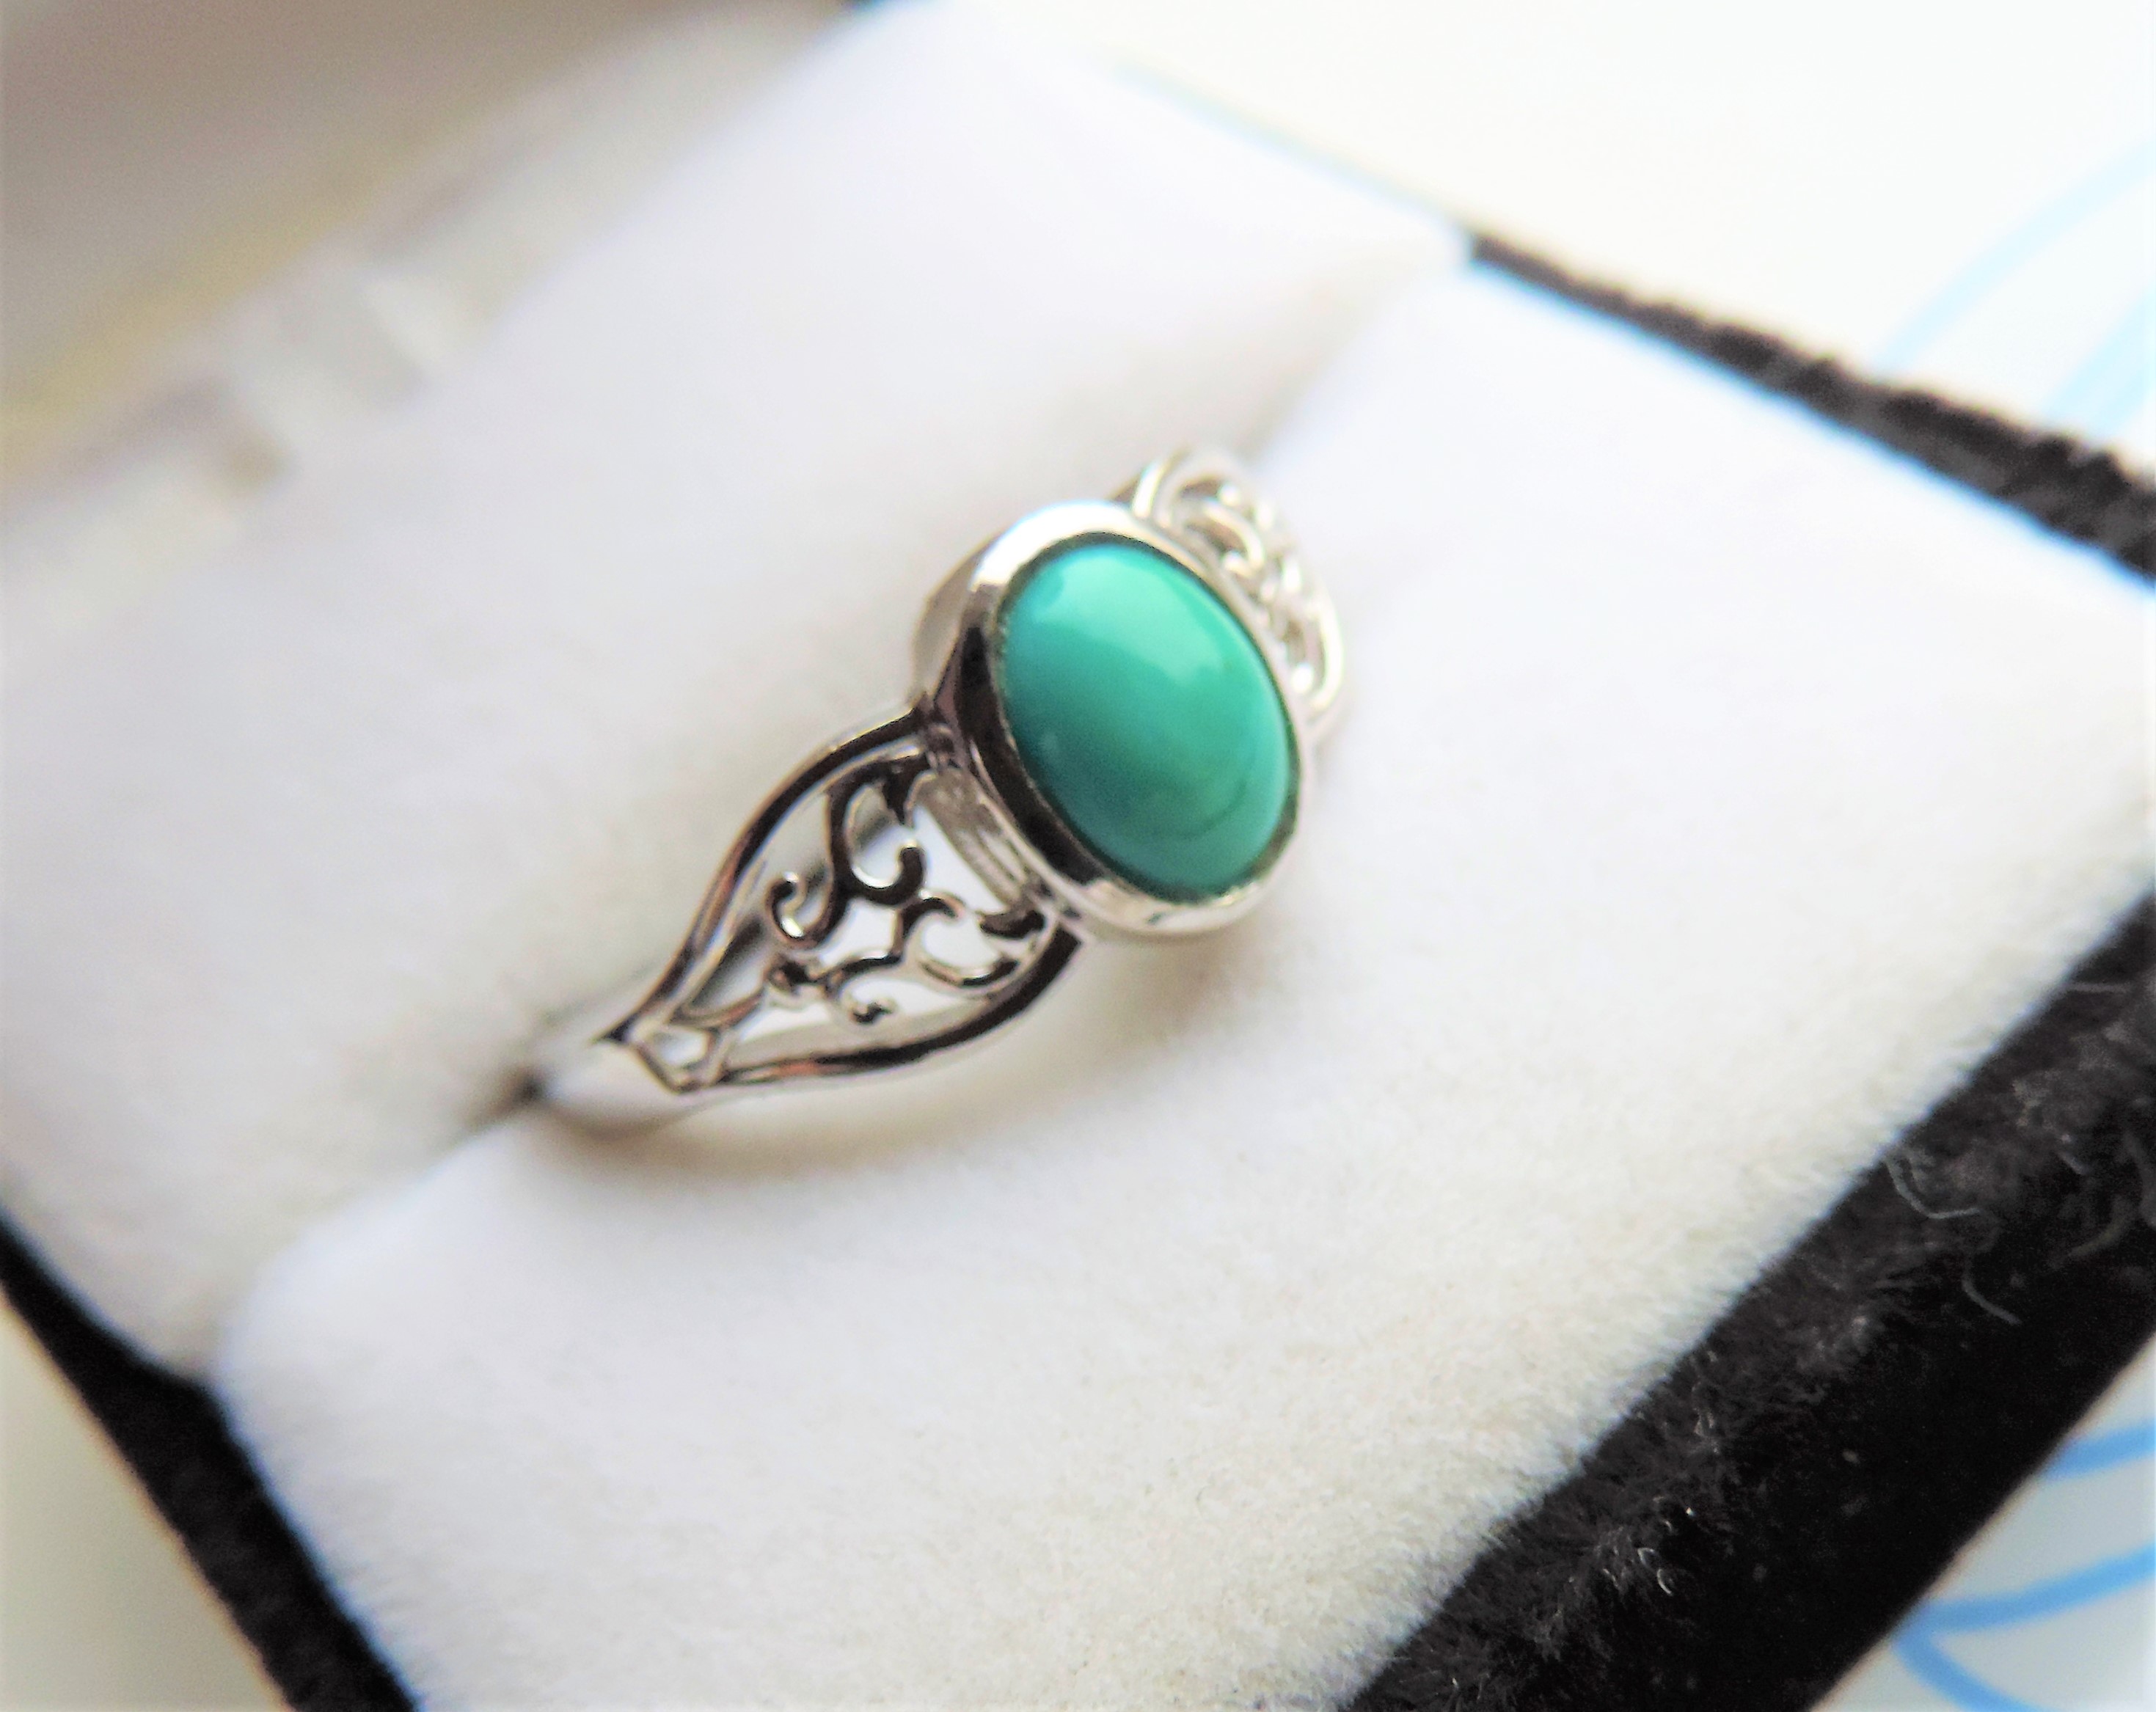 Turquoise Ring in 925 Sterling Silver - Image 5 of 5